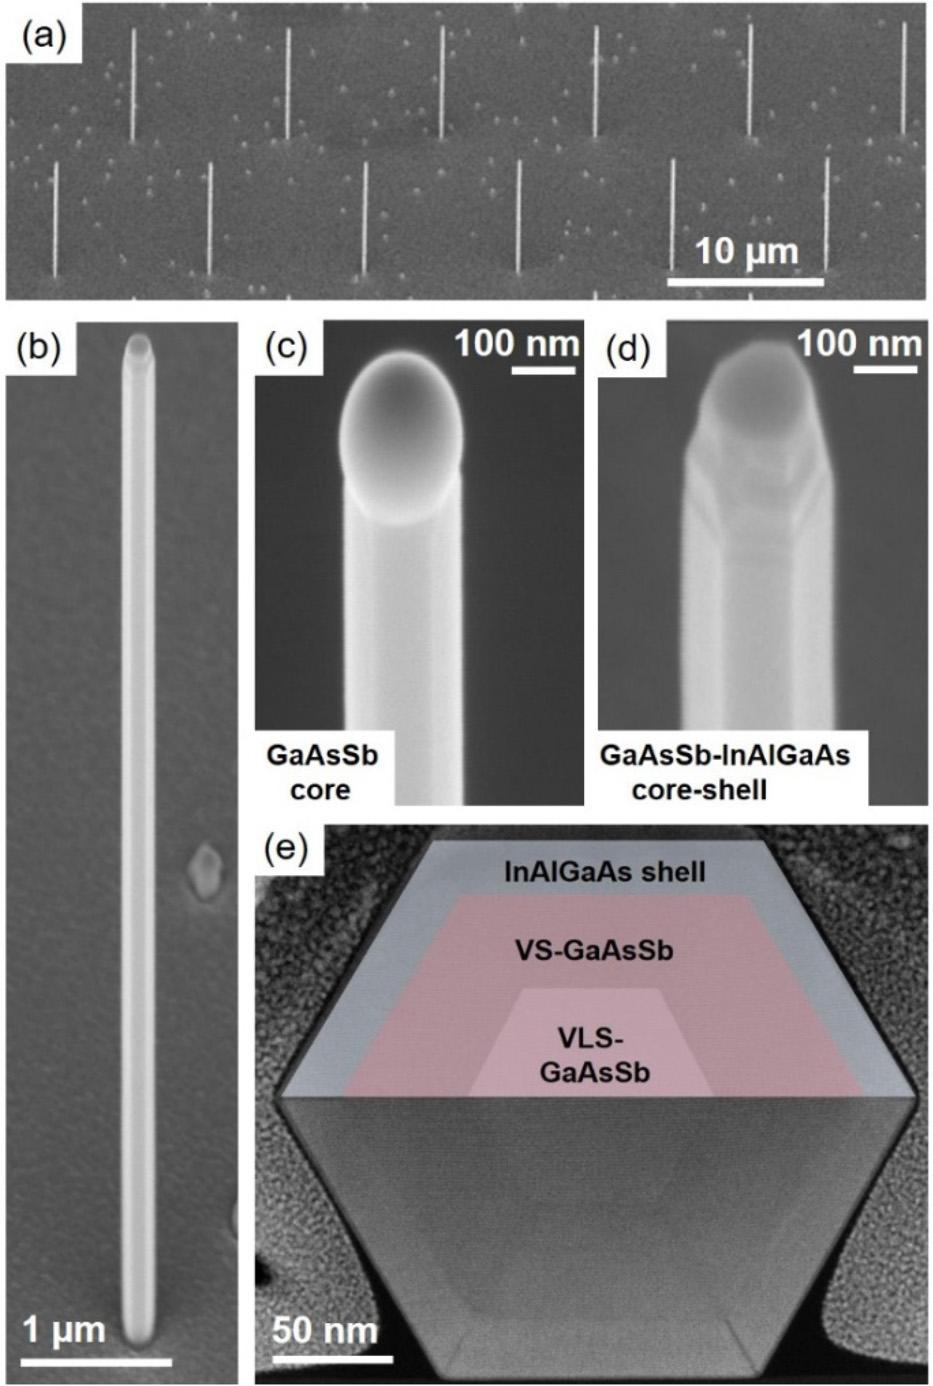 Figure 1: Scanning electron microscope (SEM) images of InAlGaAs-passivated GaAsSb NWs (~20% Sb-content): (a) overview image of array at 10μm pitch; (b) higher magnification of a single NW; (c) core-only GaAsSb reference showing Ga droplet at tip; and (d) corresponding image of core–shell GaAsSb–InAlGaAs NW. (e) Cross-sectional scanning transmission electron microscopy high-angle annular dark-field (STEM-HAADF) image and overlaid, color-coded schematic of the GaAsSb–InAlGaAs core–shell structure. 